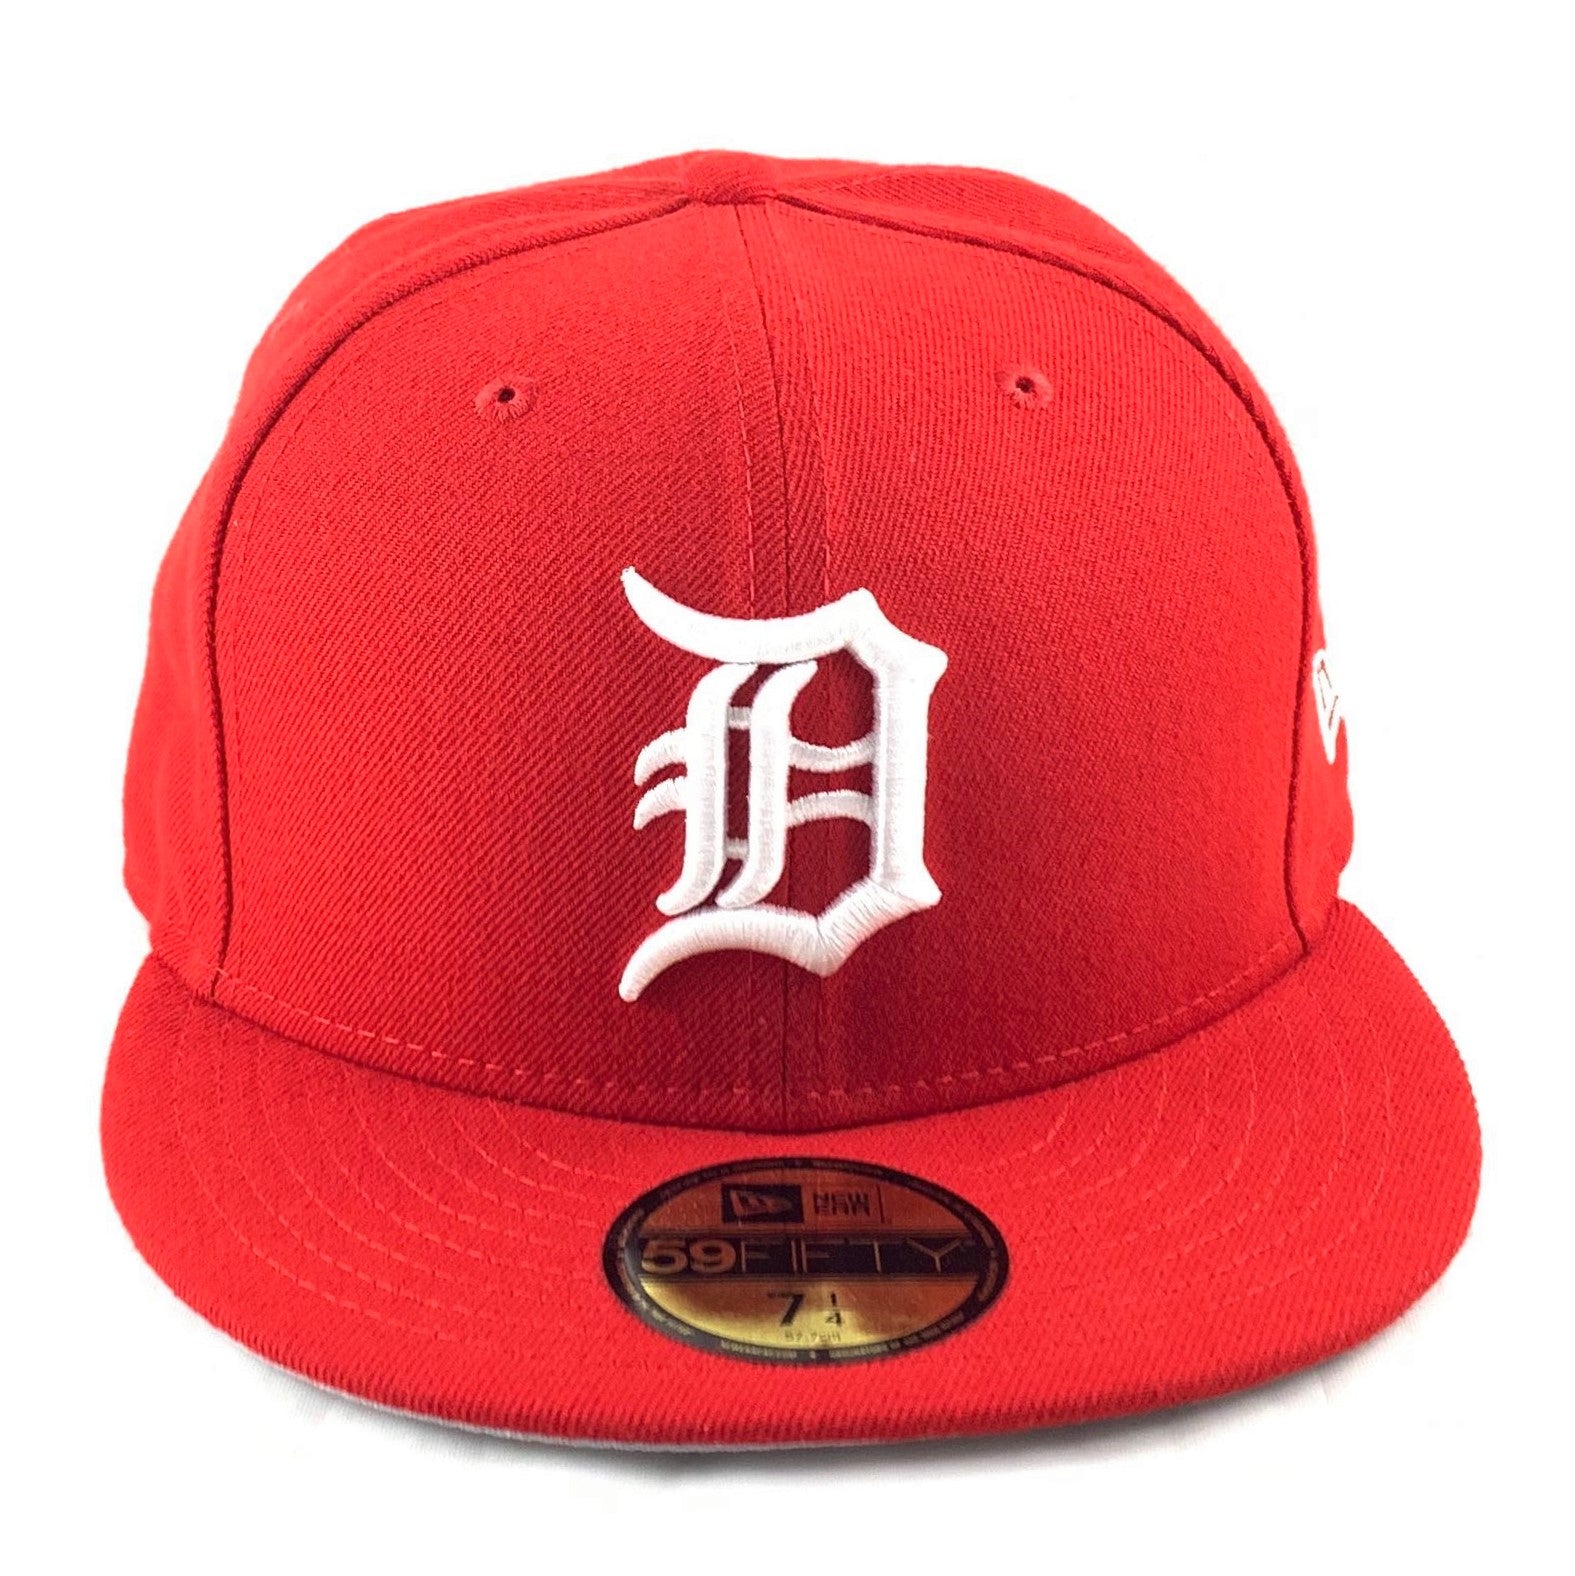 Detroit Tigers fitted hat size 71/4